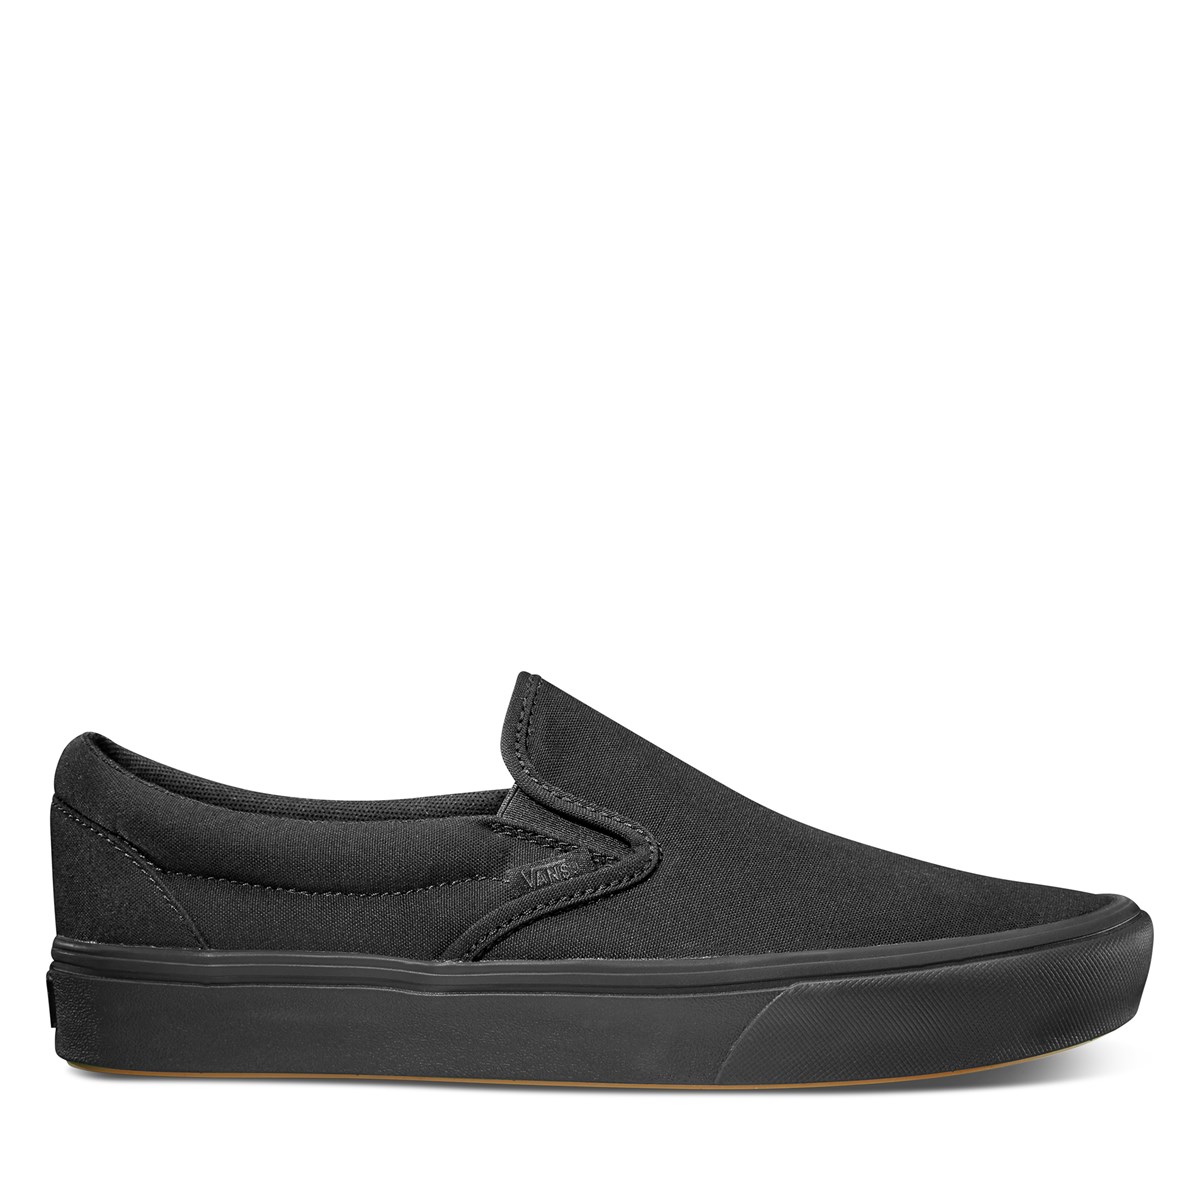 ComfyCush Classic Slip-Ons in All Black